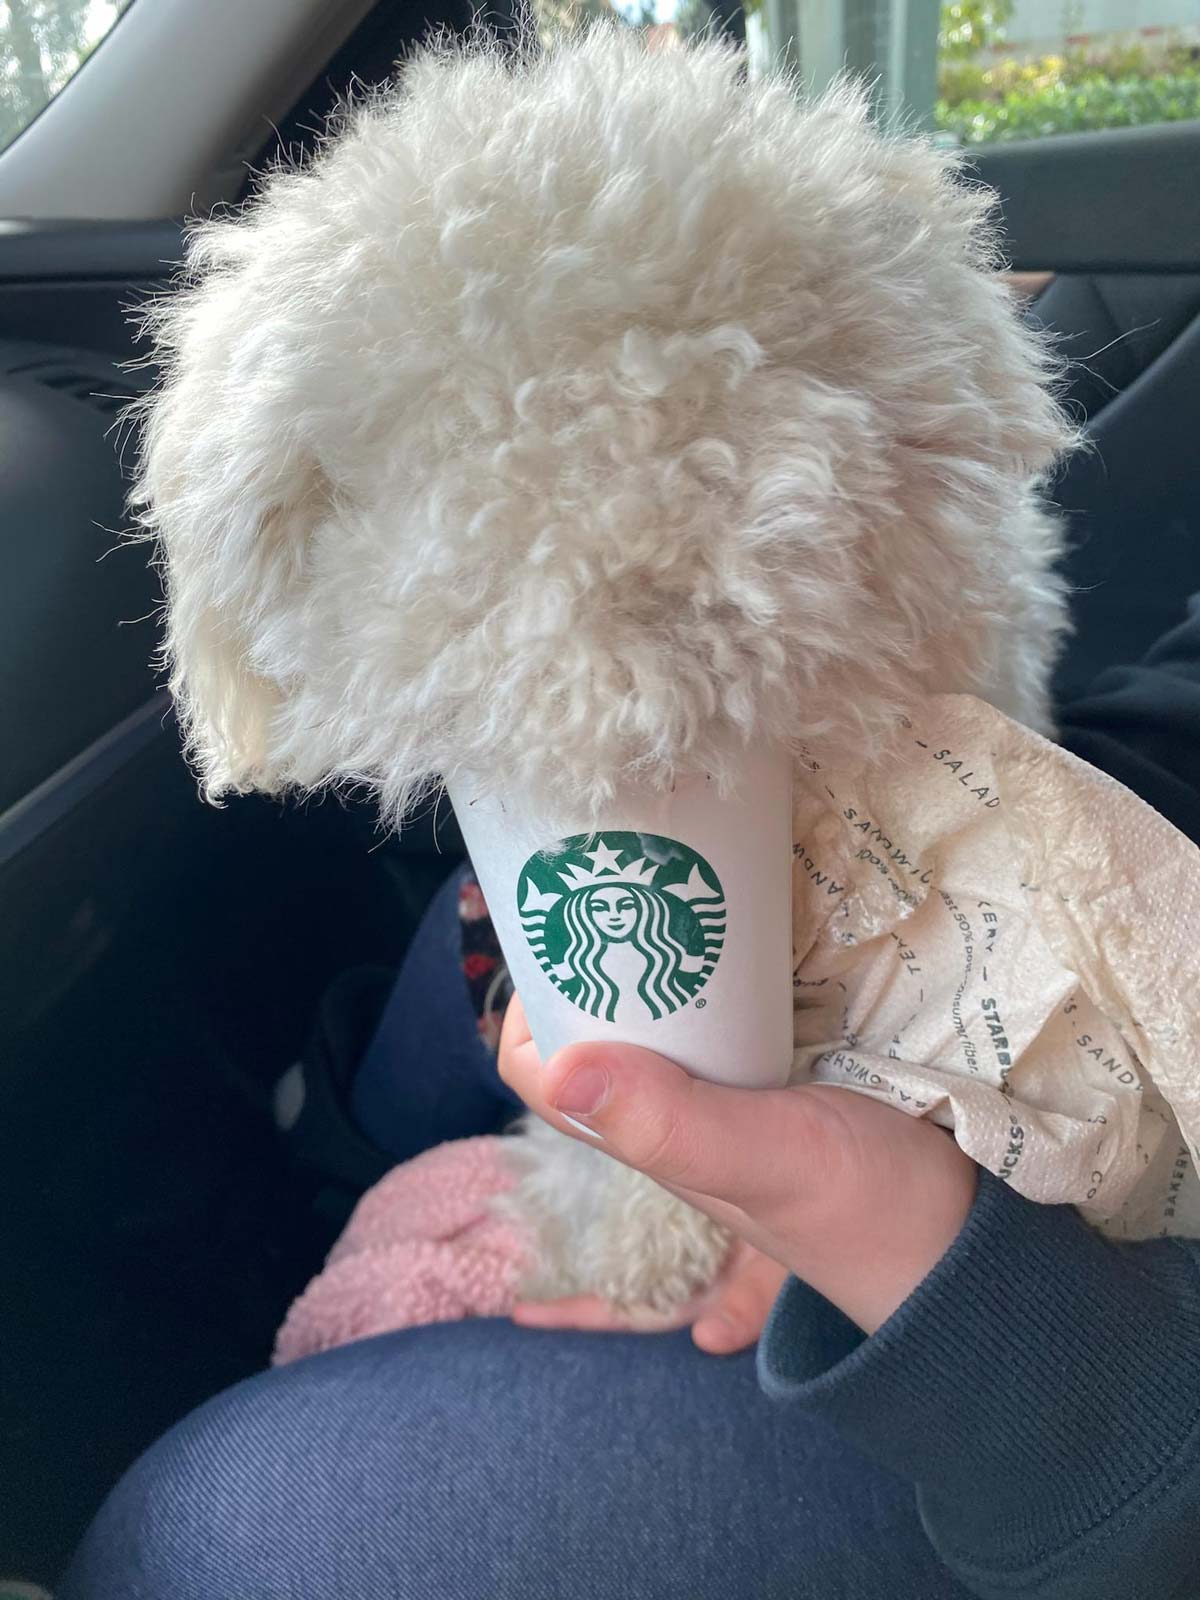 My puppy eating a Puppuccino